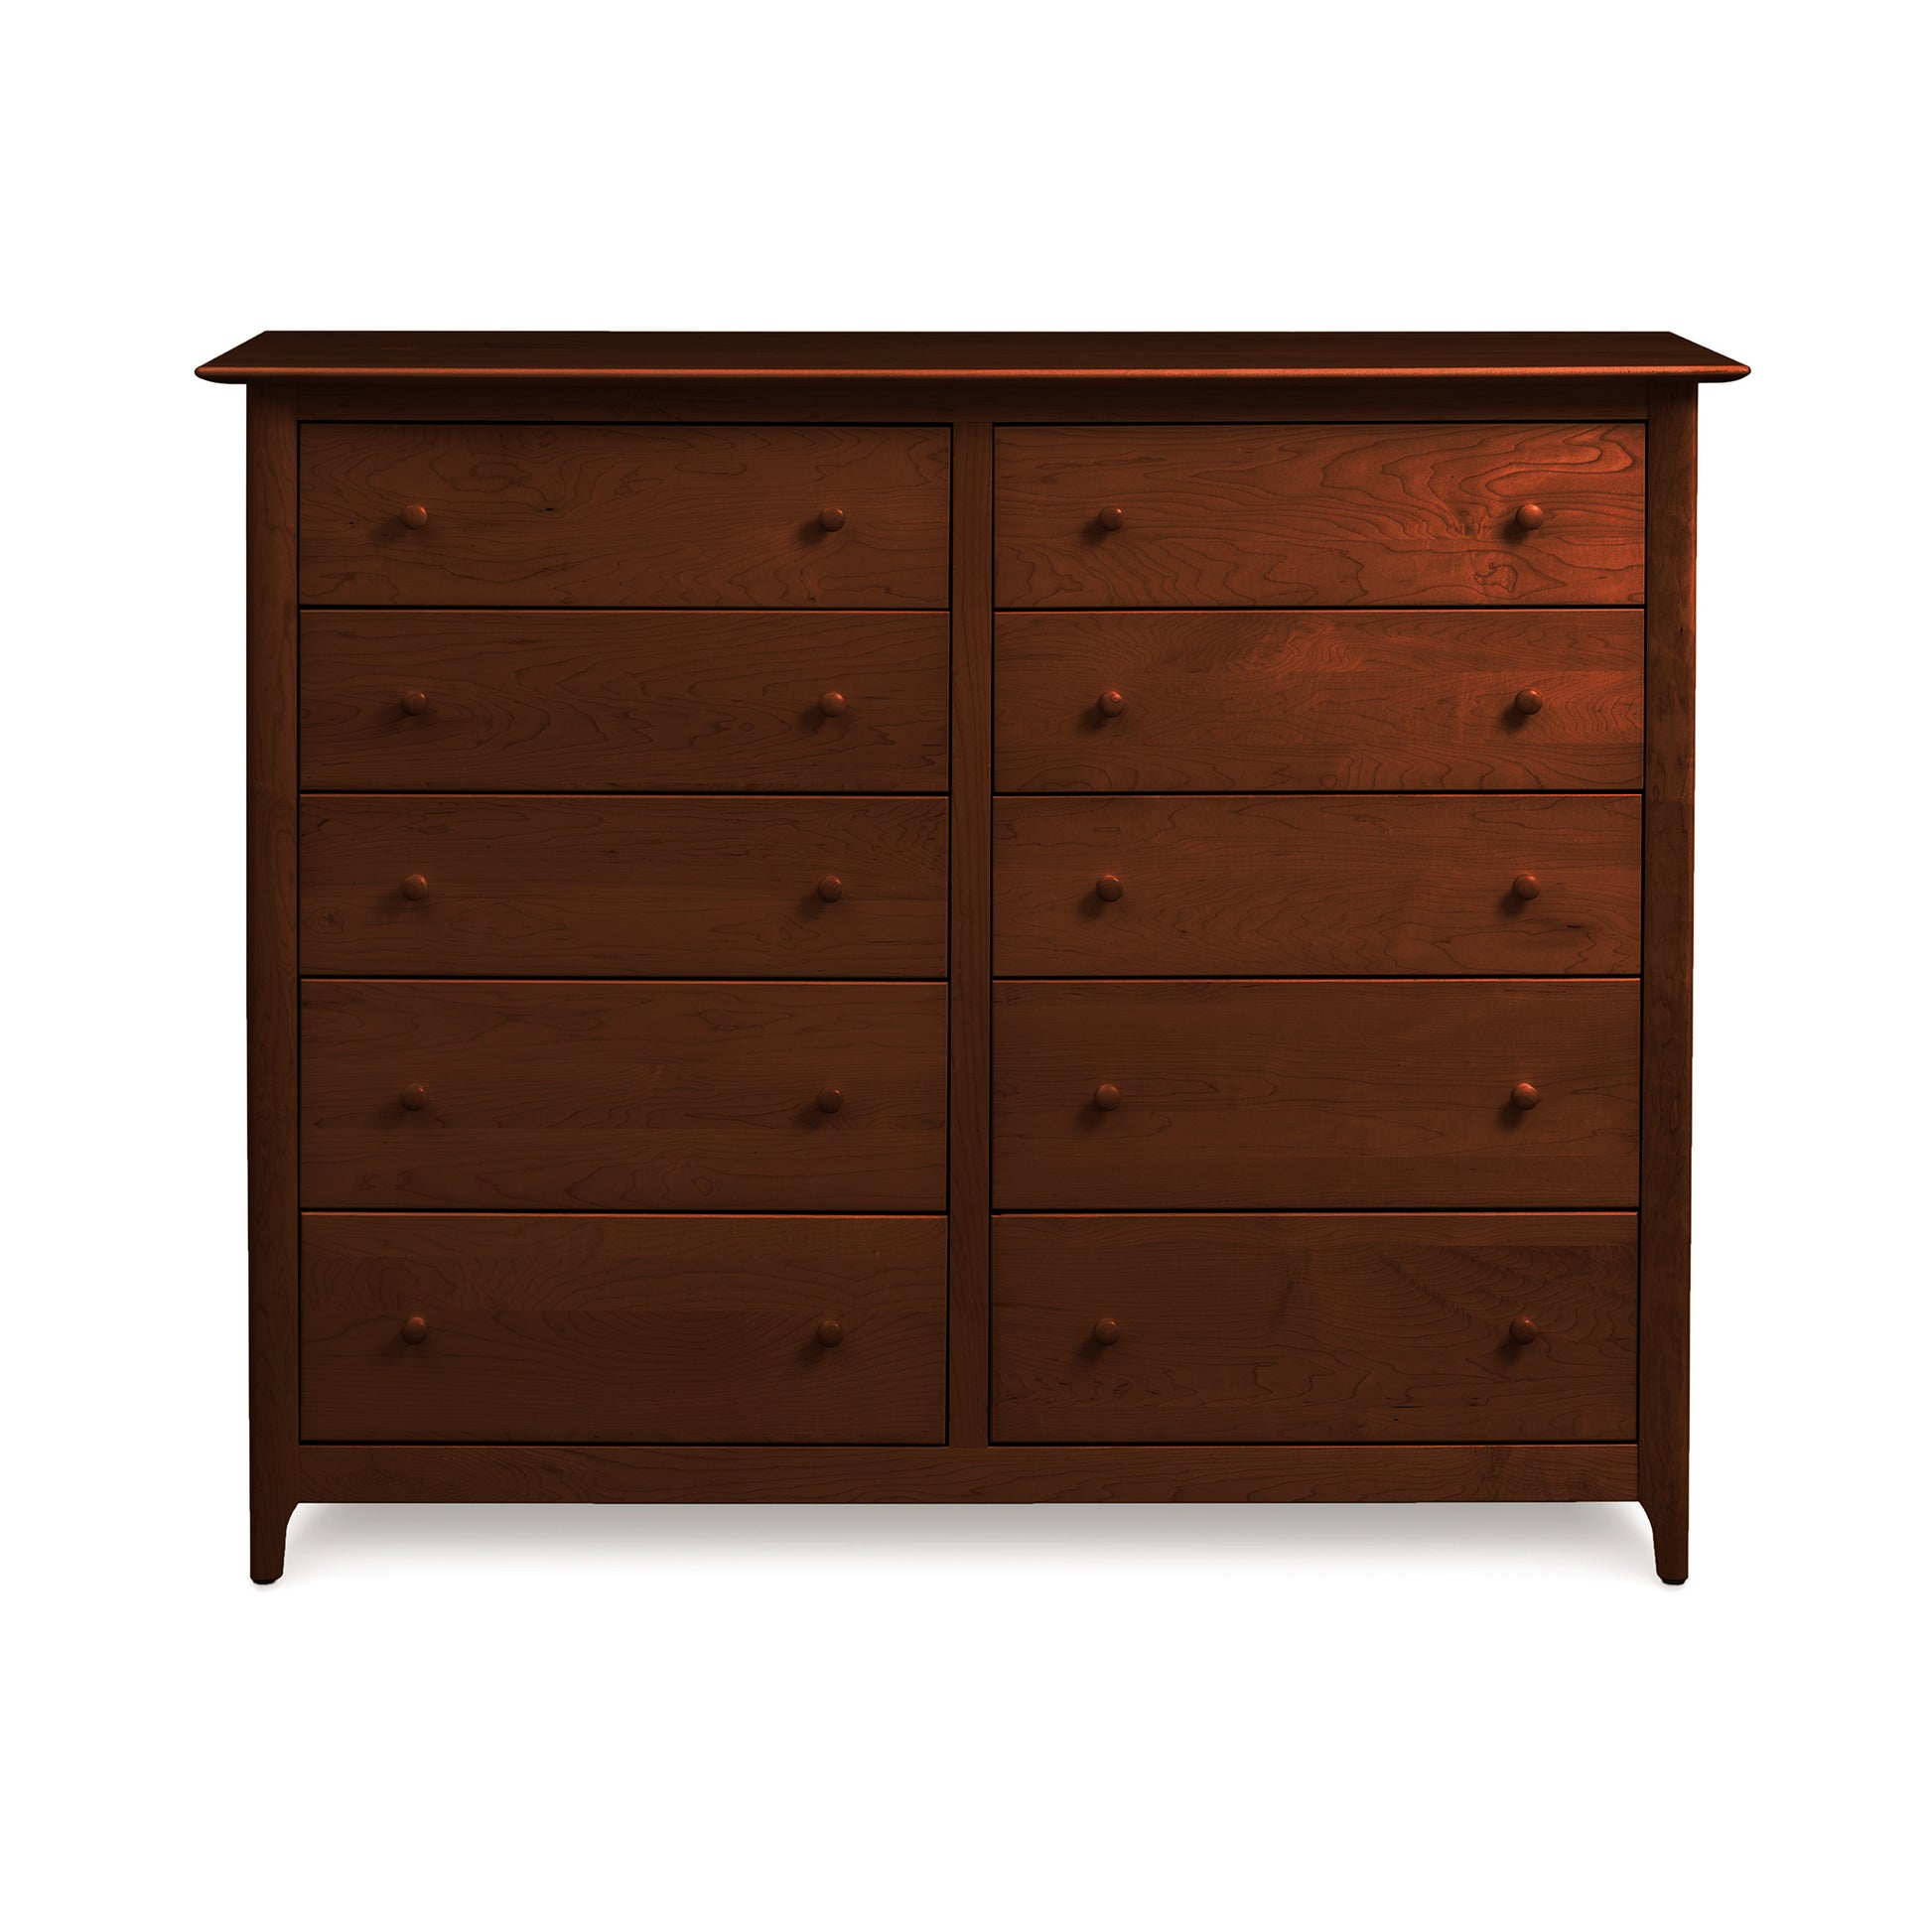 A Copeland Furniture Sarah 10-Drawer Dresser with multiple solid wood drawer boxes, isolated on a white background.